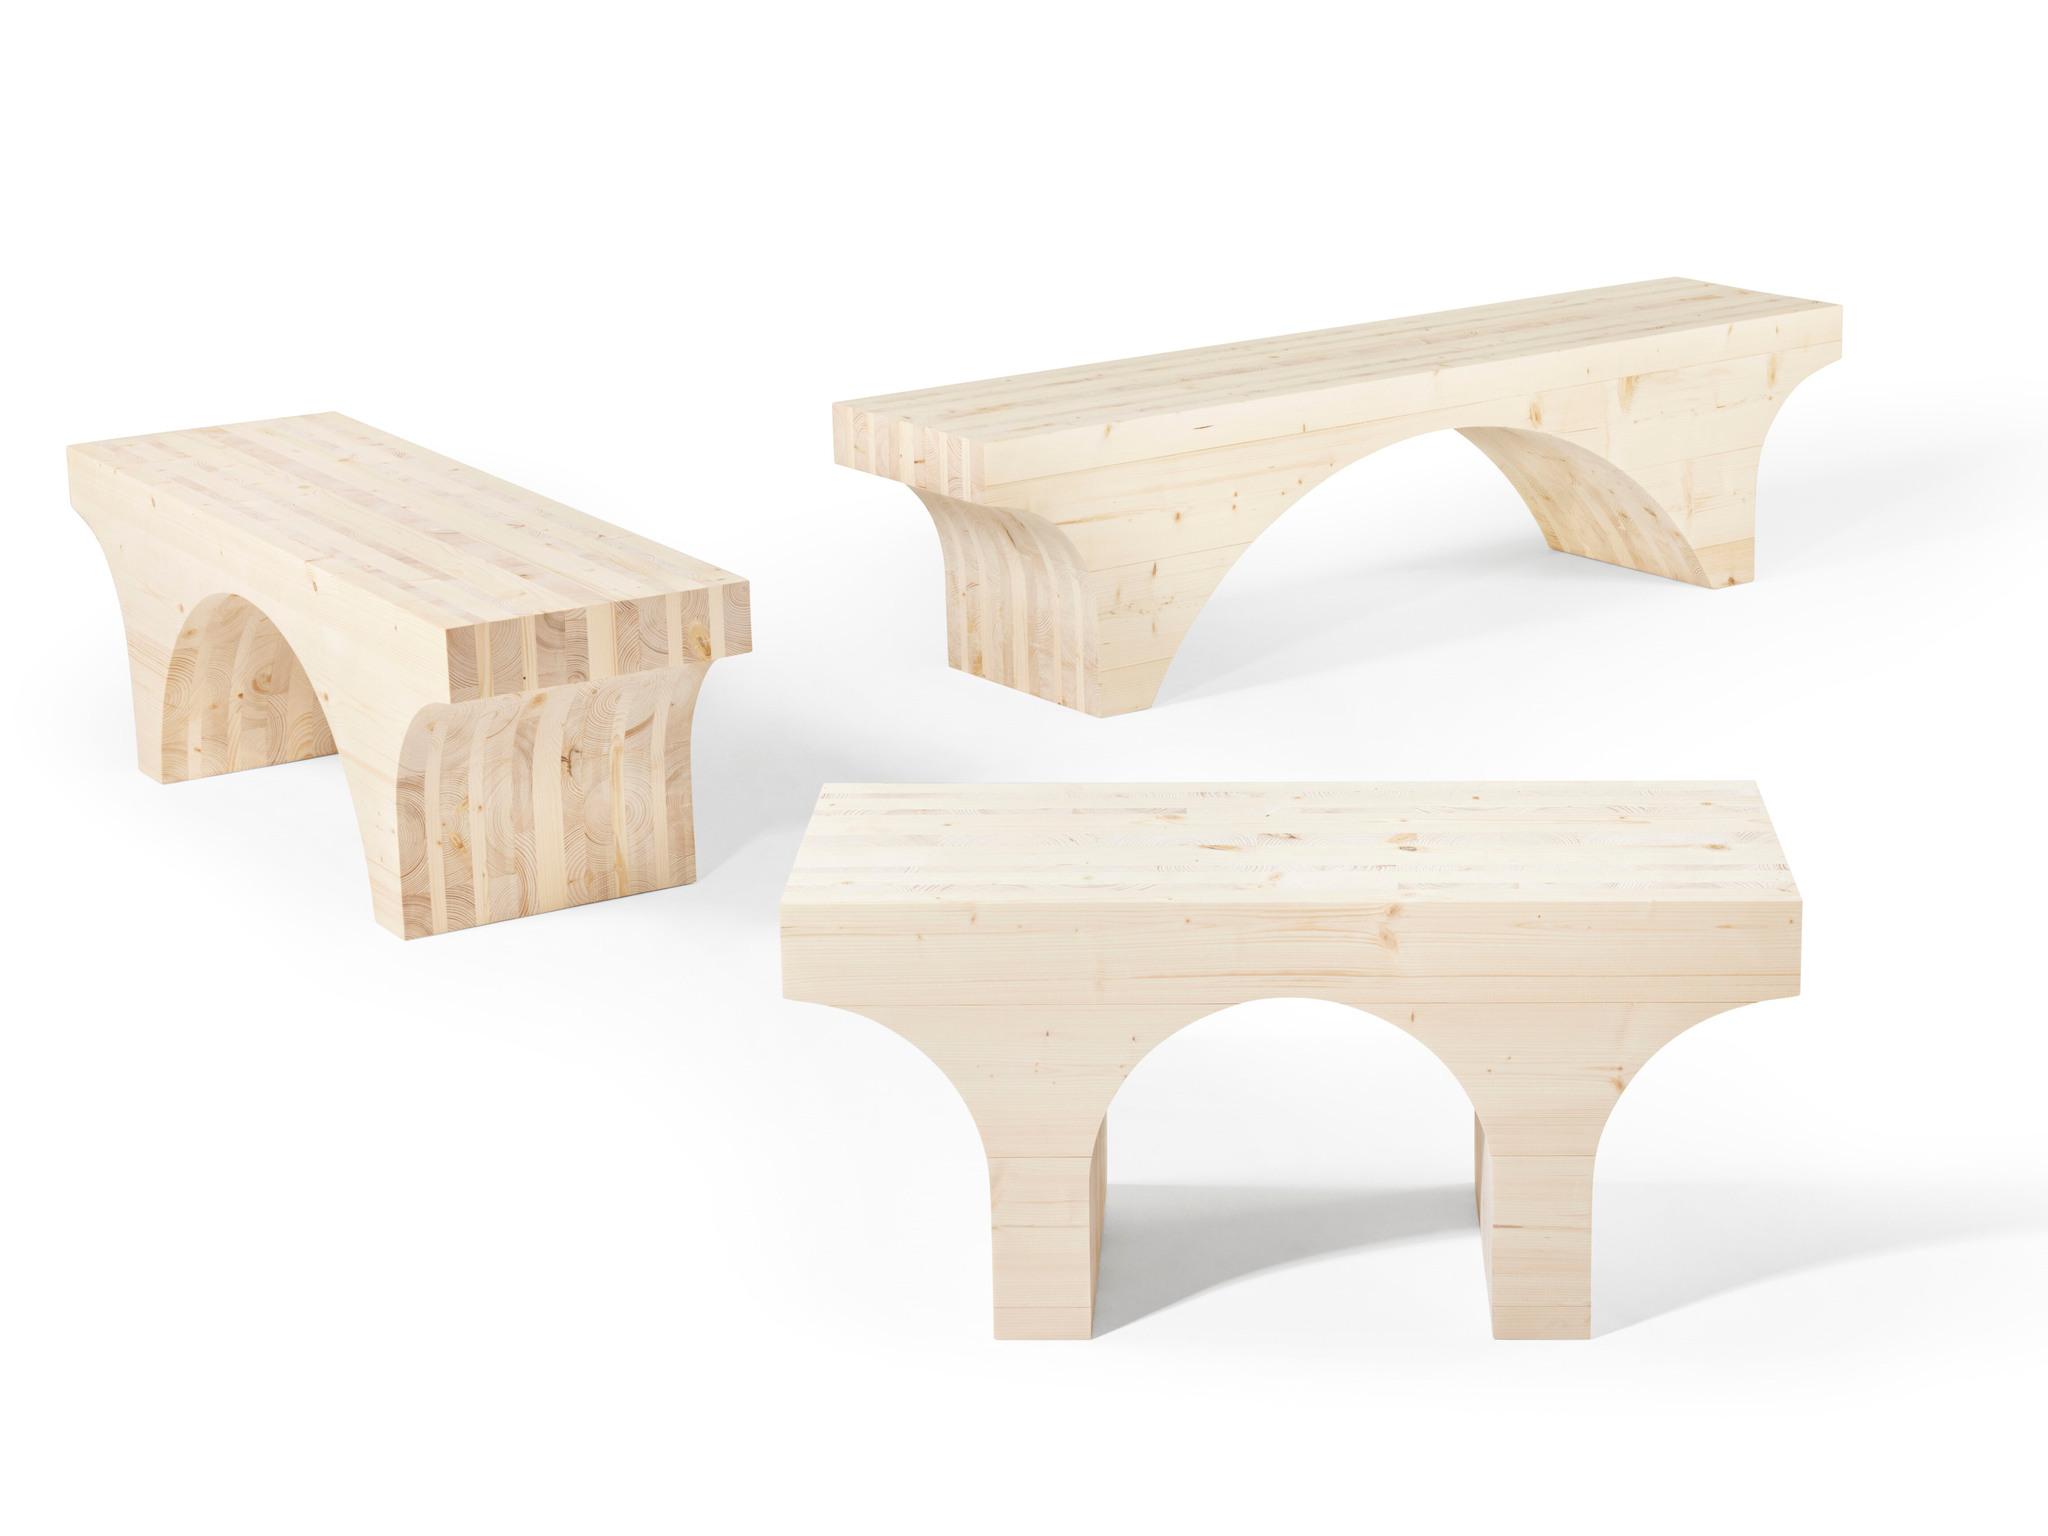 Three wooden benches with arches underneath.